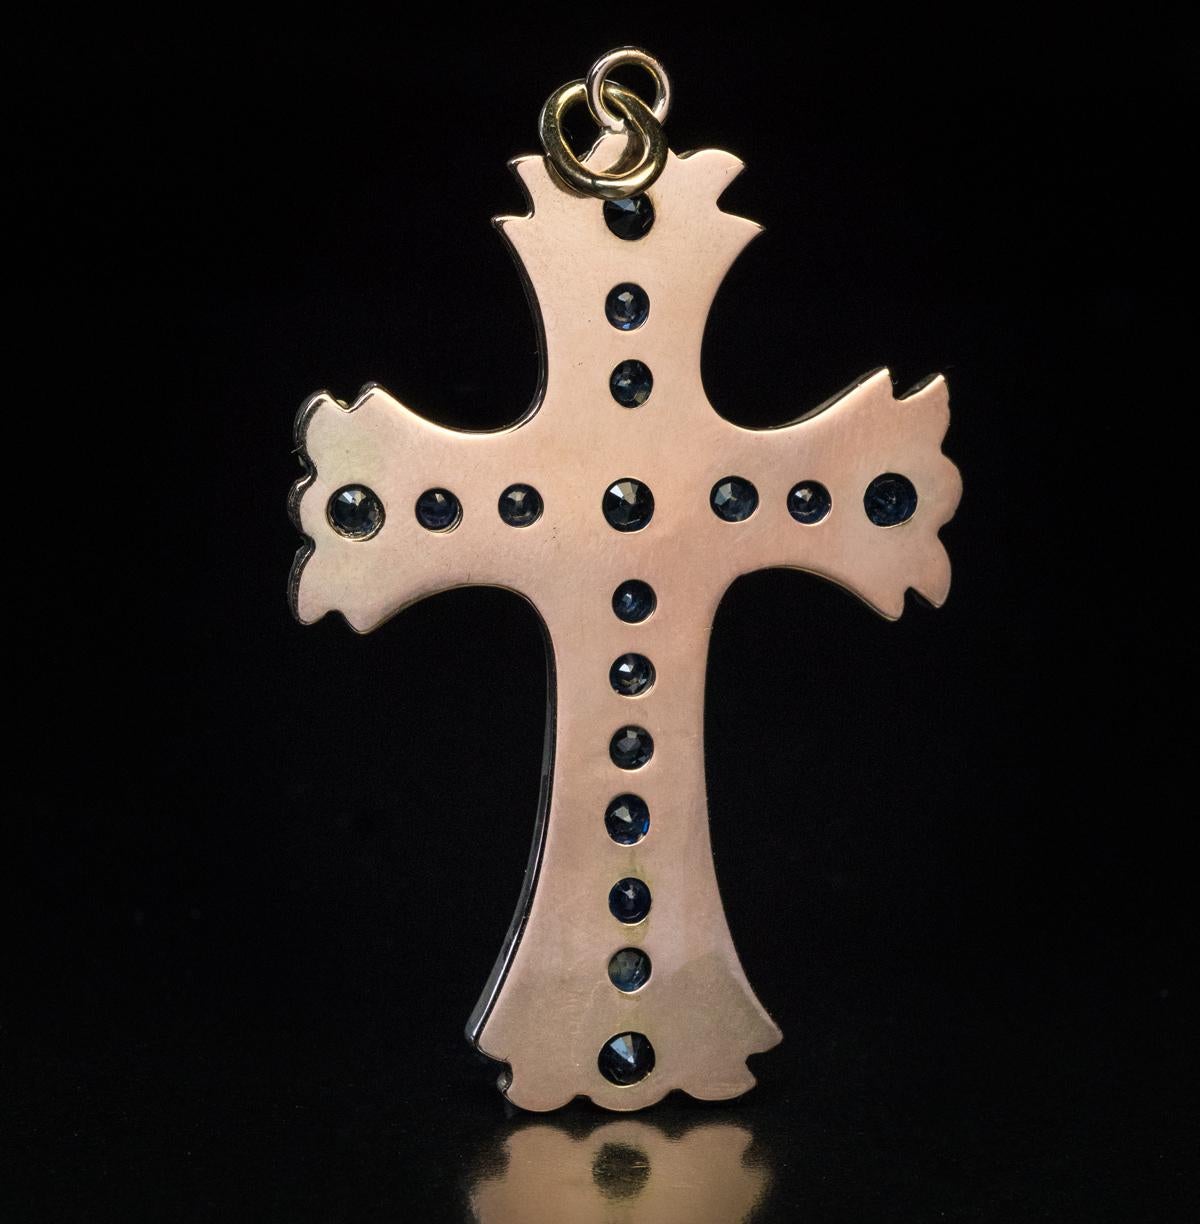 Circa 1890

An antique silver topped 14K gold (front – silver, back – gold) cross pendant is densely set with midnight blue sapphires and old rose cut diamonds.

The cross measures (without suspension ring) 52 x 34 mm (2 x 1 5/16 in.)

Sold without